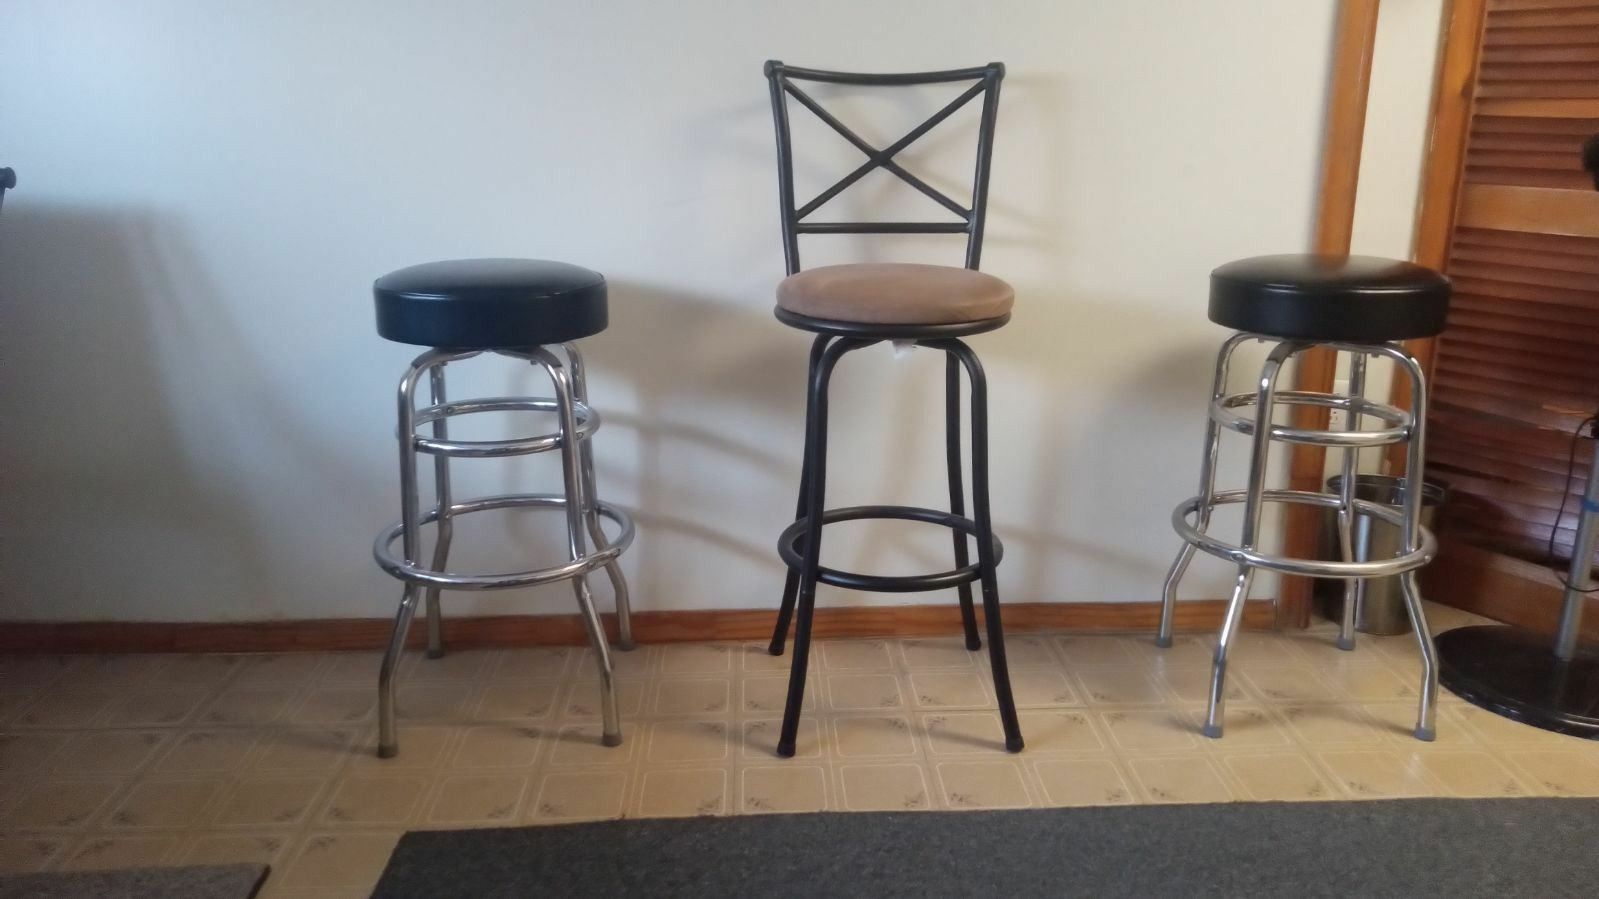 2 Bar Stools  Black Leather Cover. High Bar Stool Suede Tan With Black Metal 